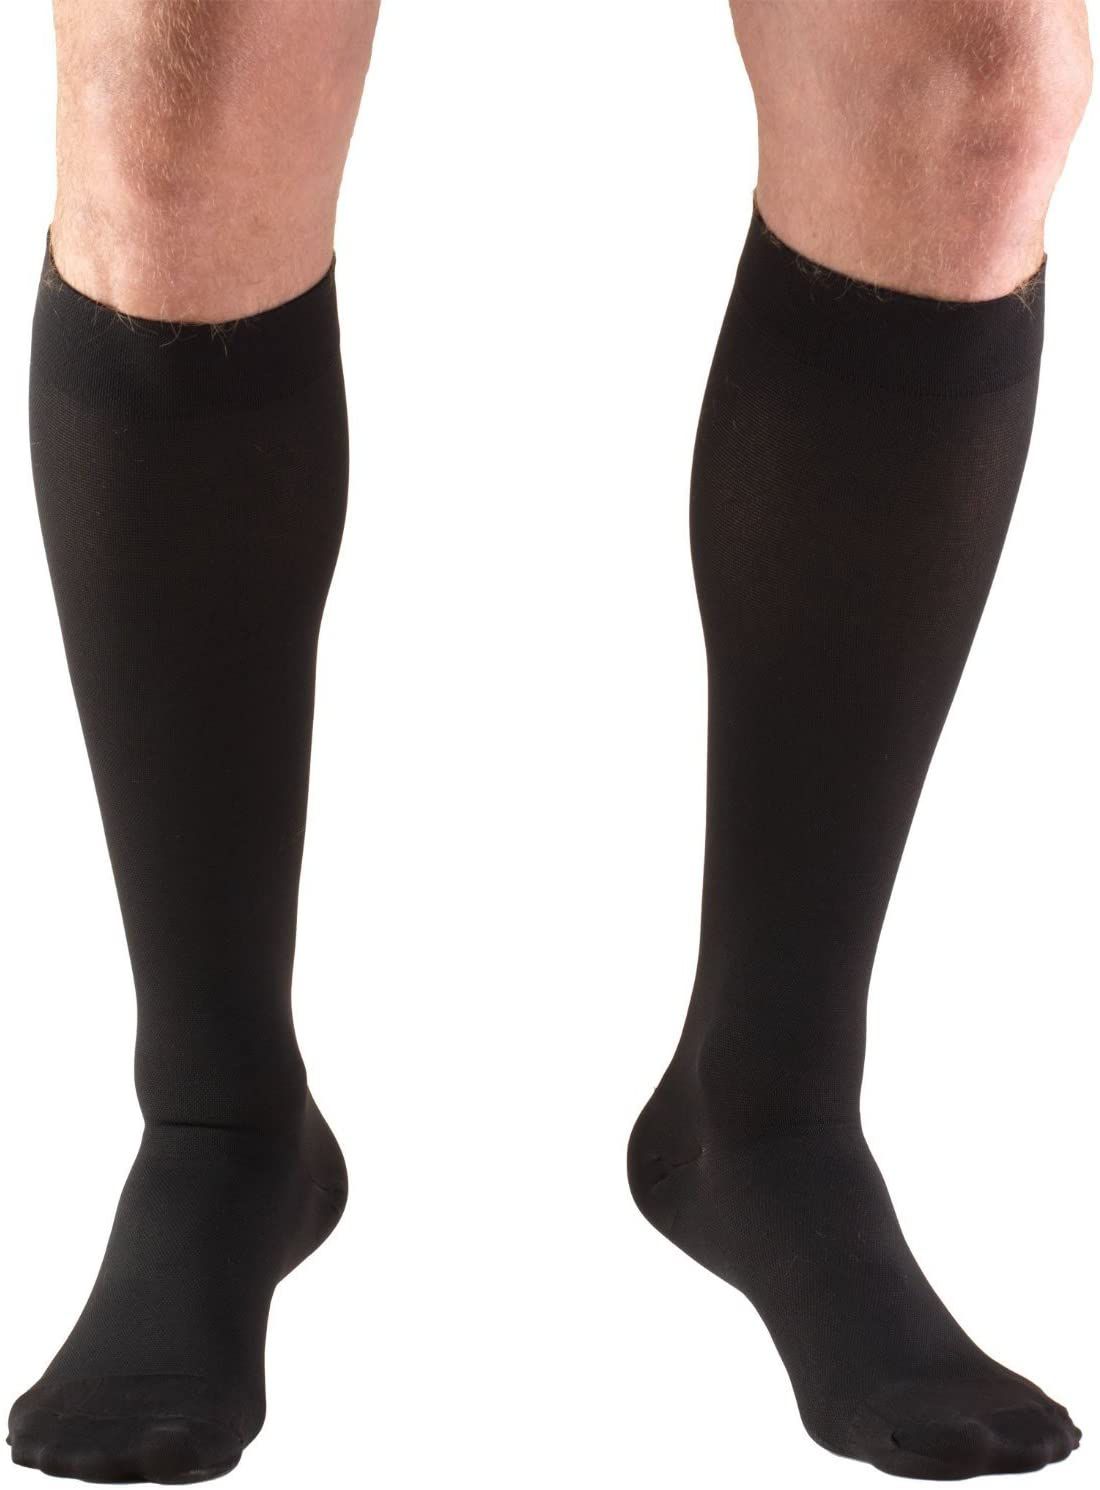 Compression socks can help alleviate swelling and soreness.